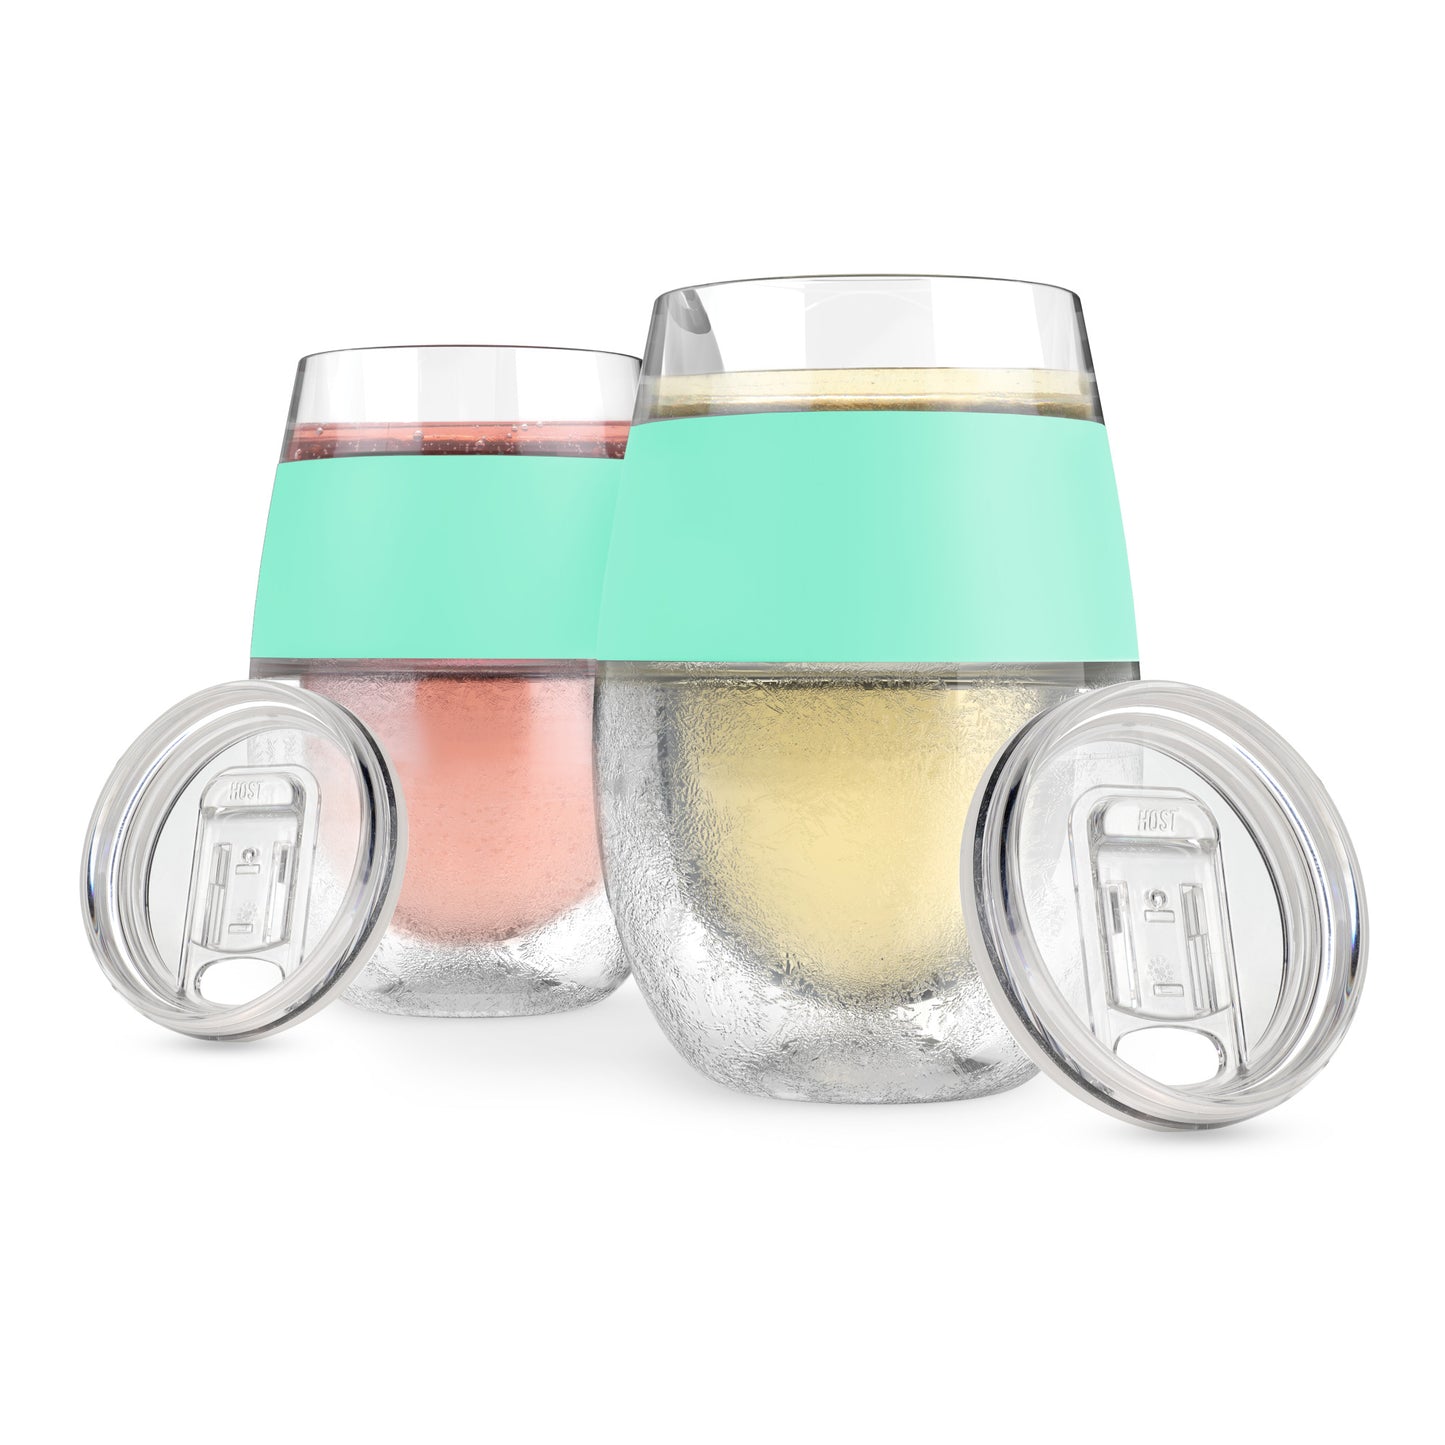 Wine FREEZE™ Cooling Cups in Mint (set of 2) and lids